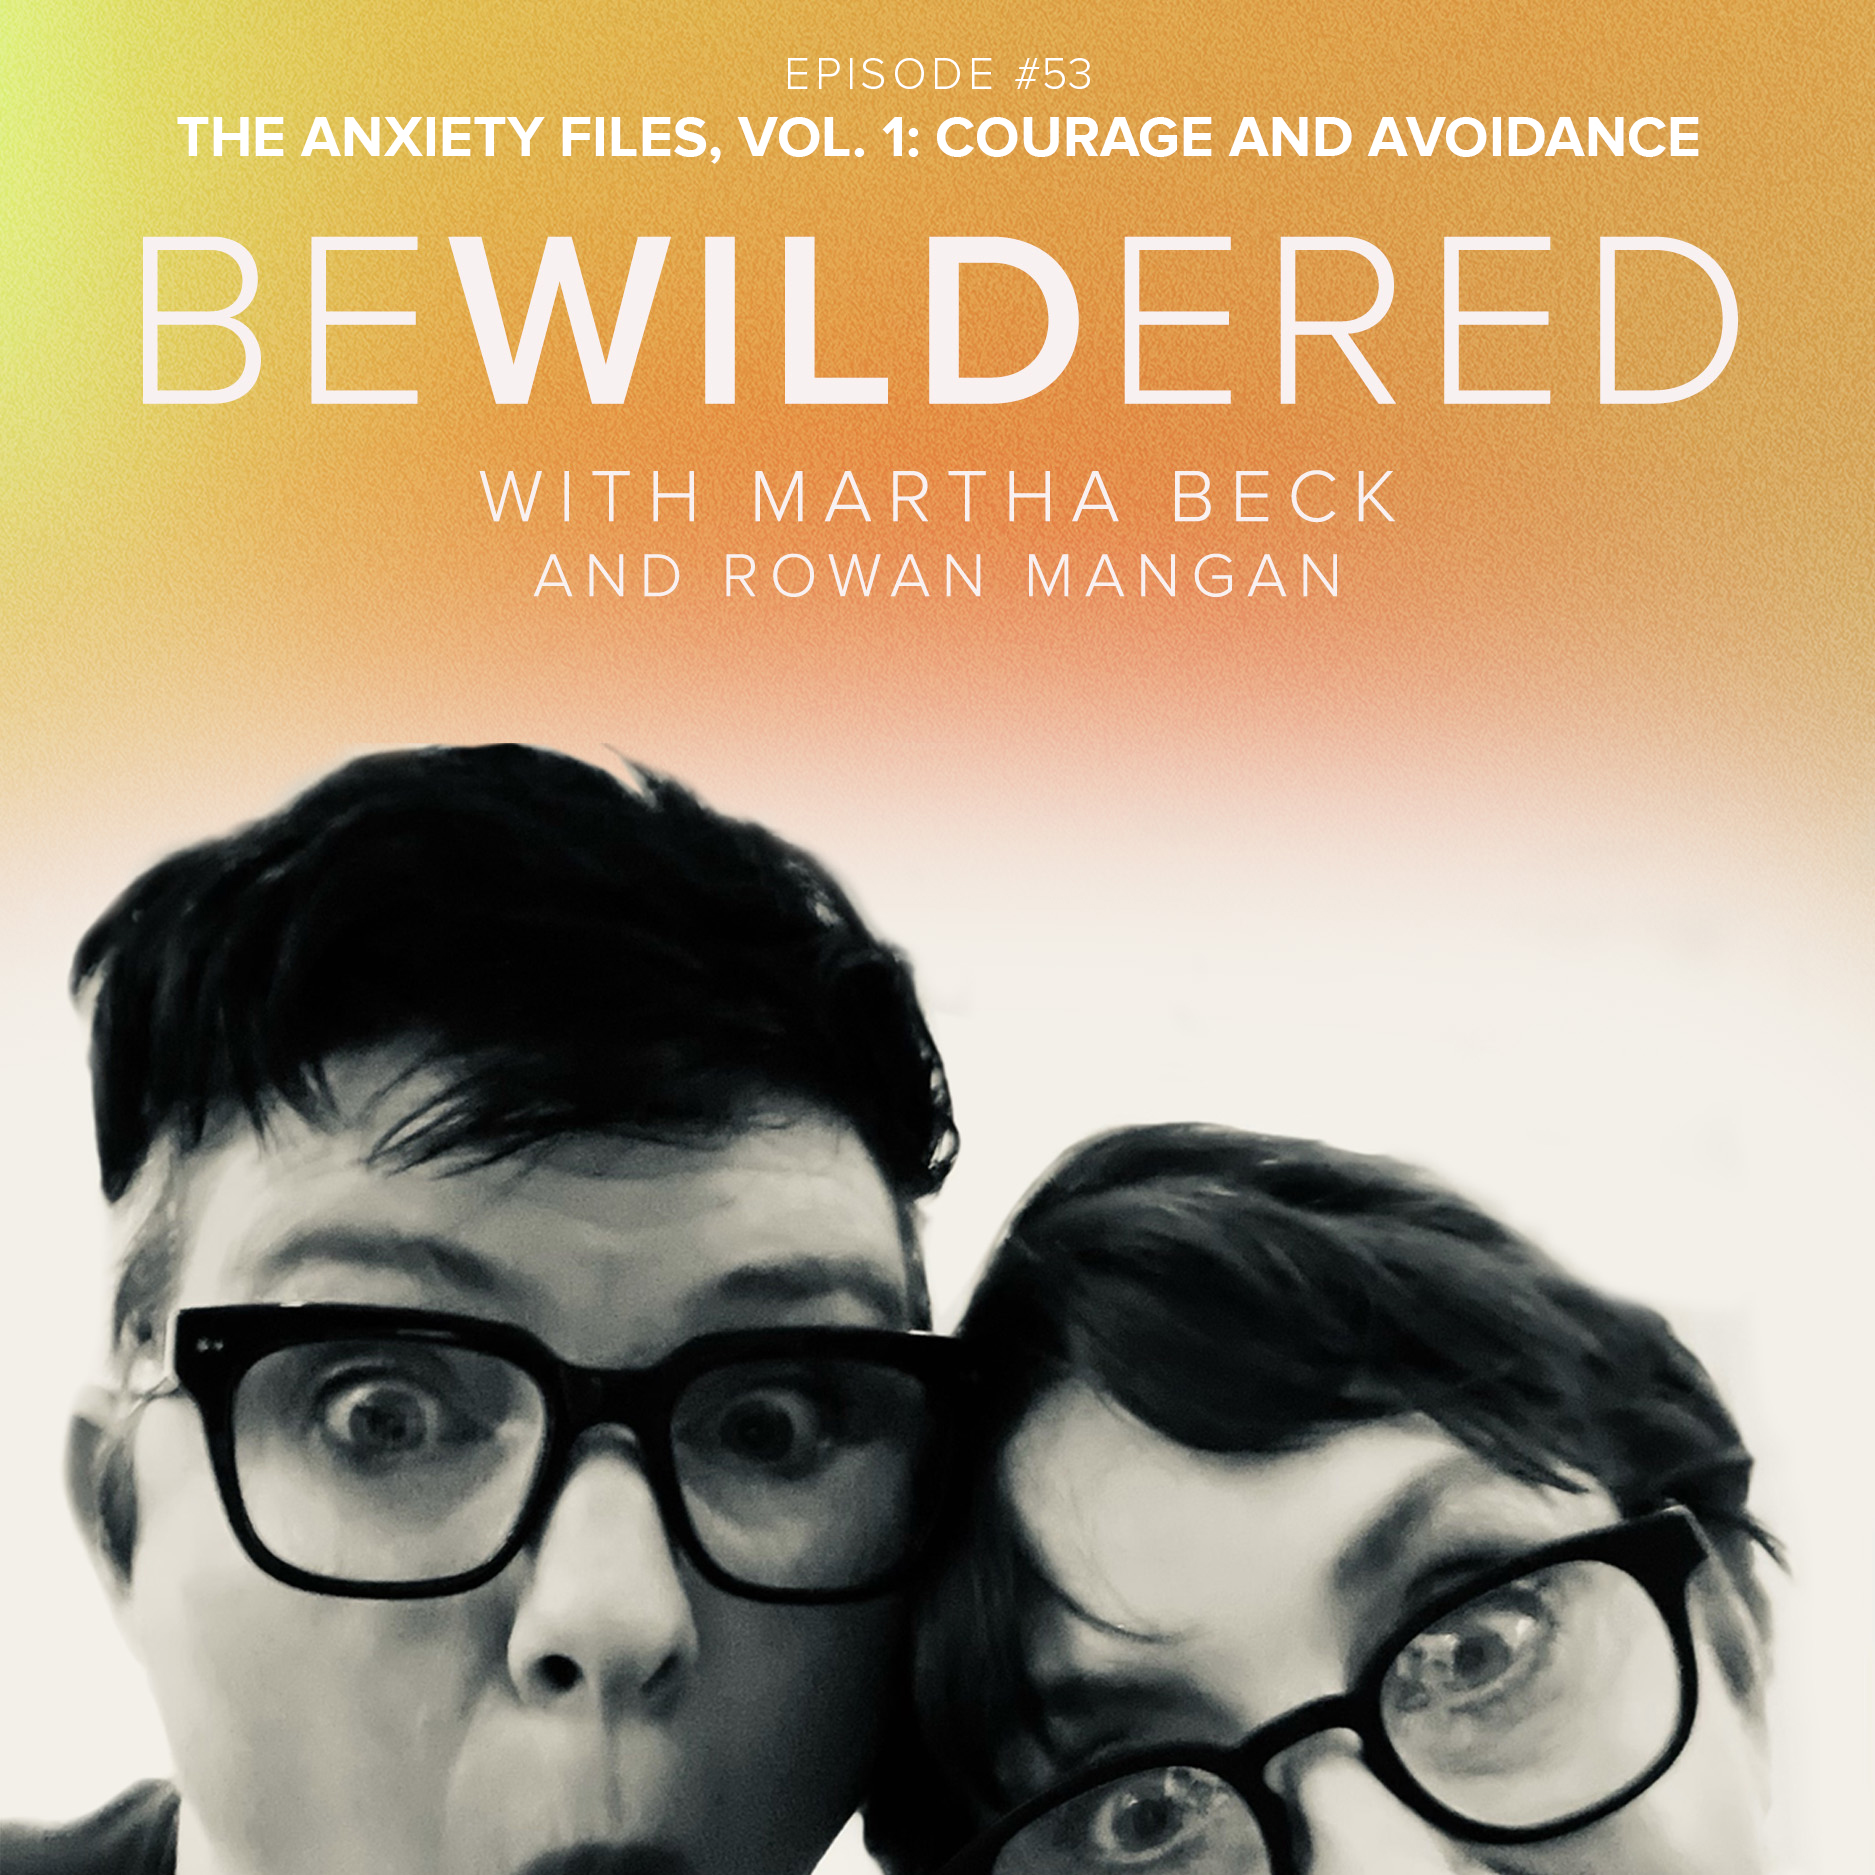 Image for Episode #53 The Anxiety Files, Vol. 1: Courage and Avoidance for the Bewildered Podcast with Martha Beck and Rowan Mangan